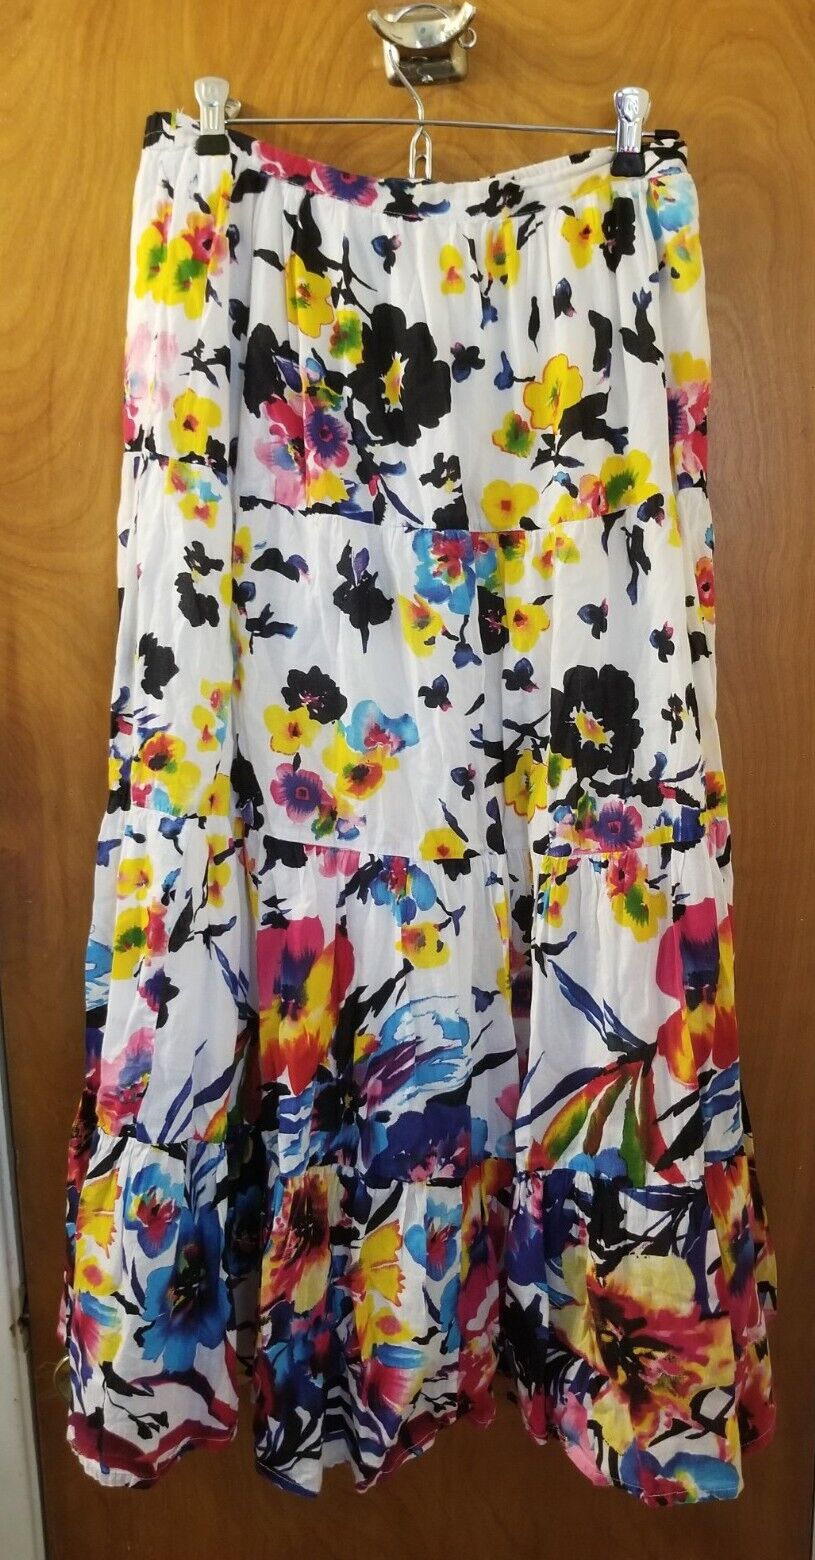 New Directions Colorful Full Tiered Floral Cotton Boho Peasant Skirt Size Small 